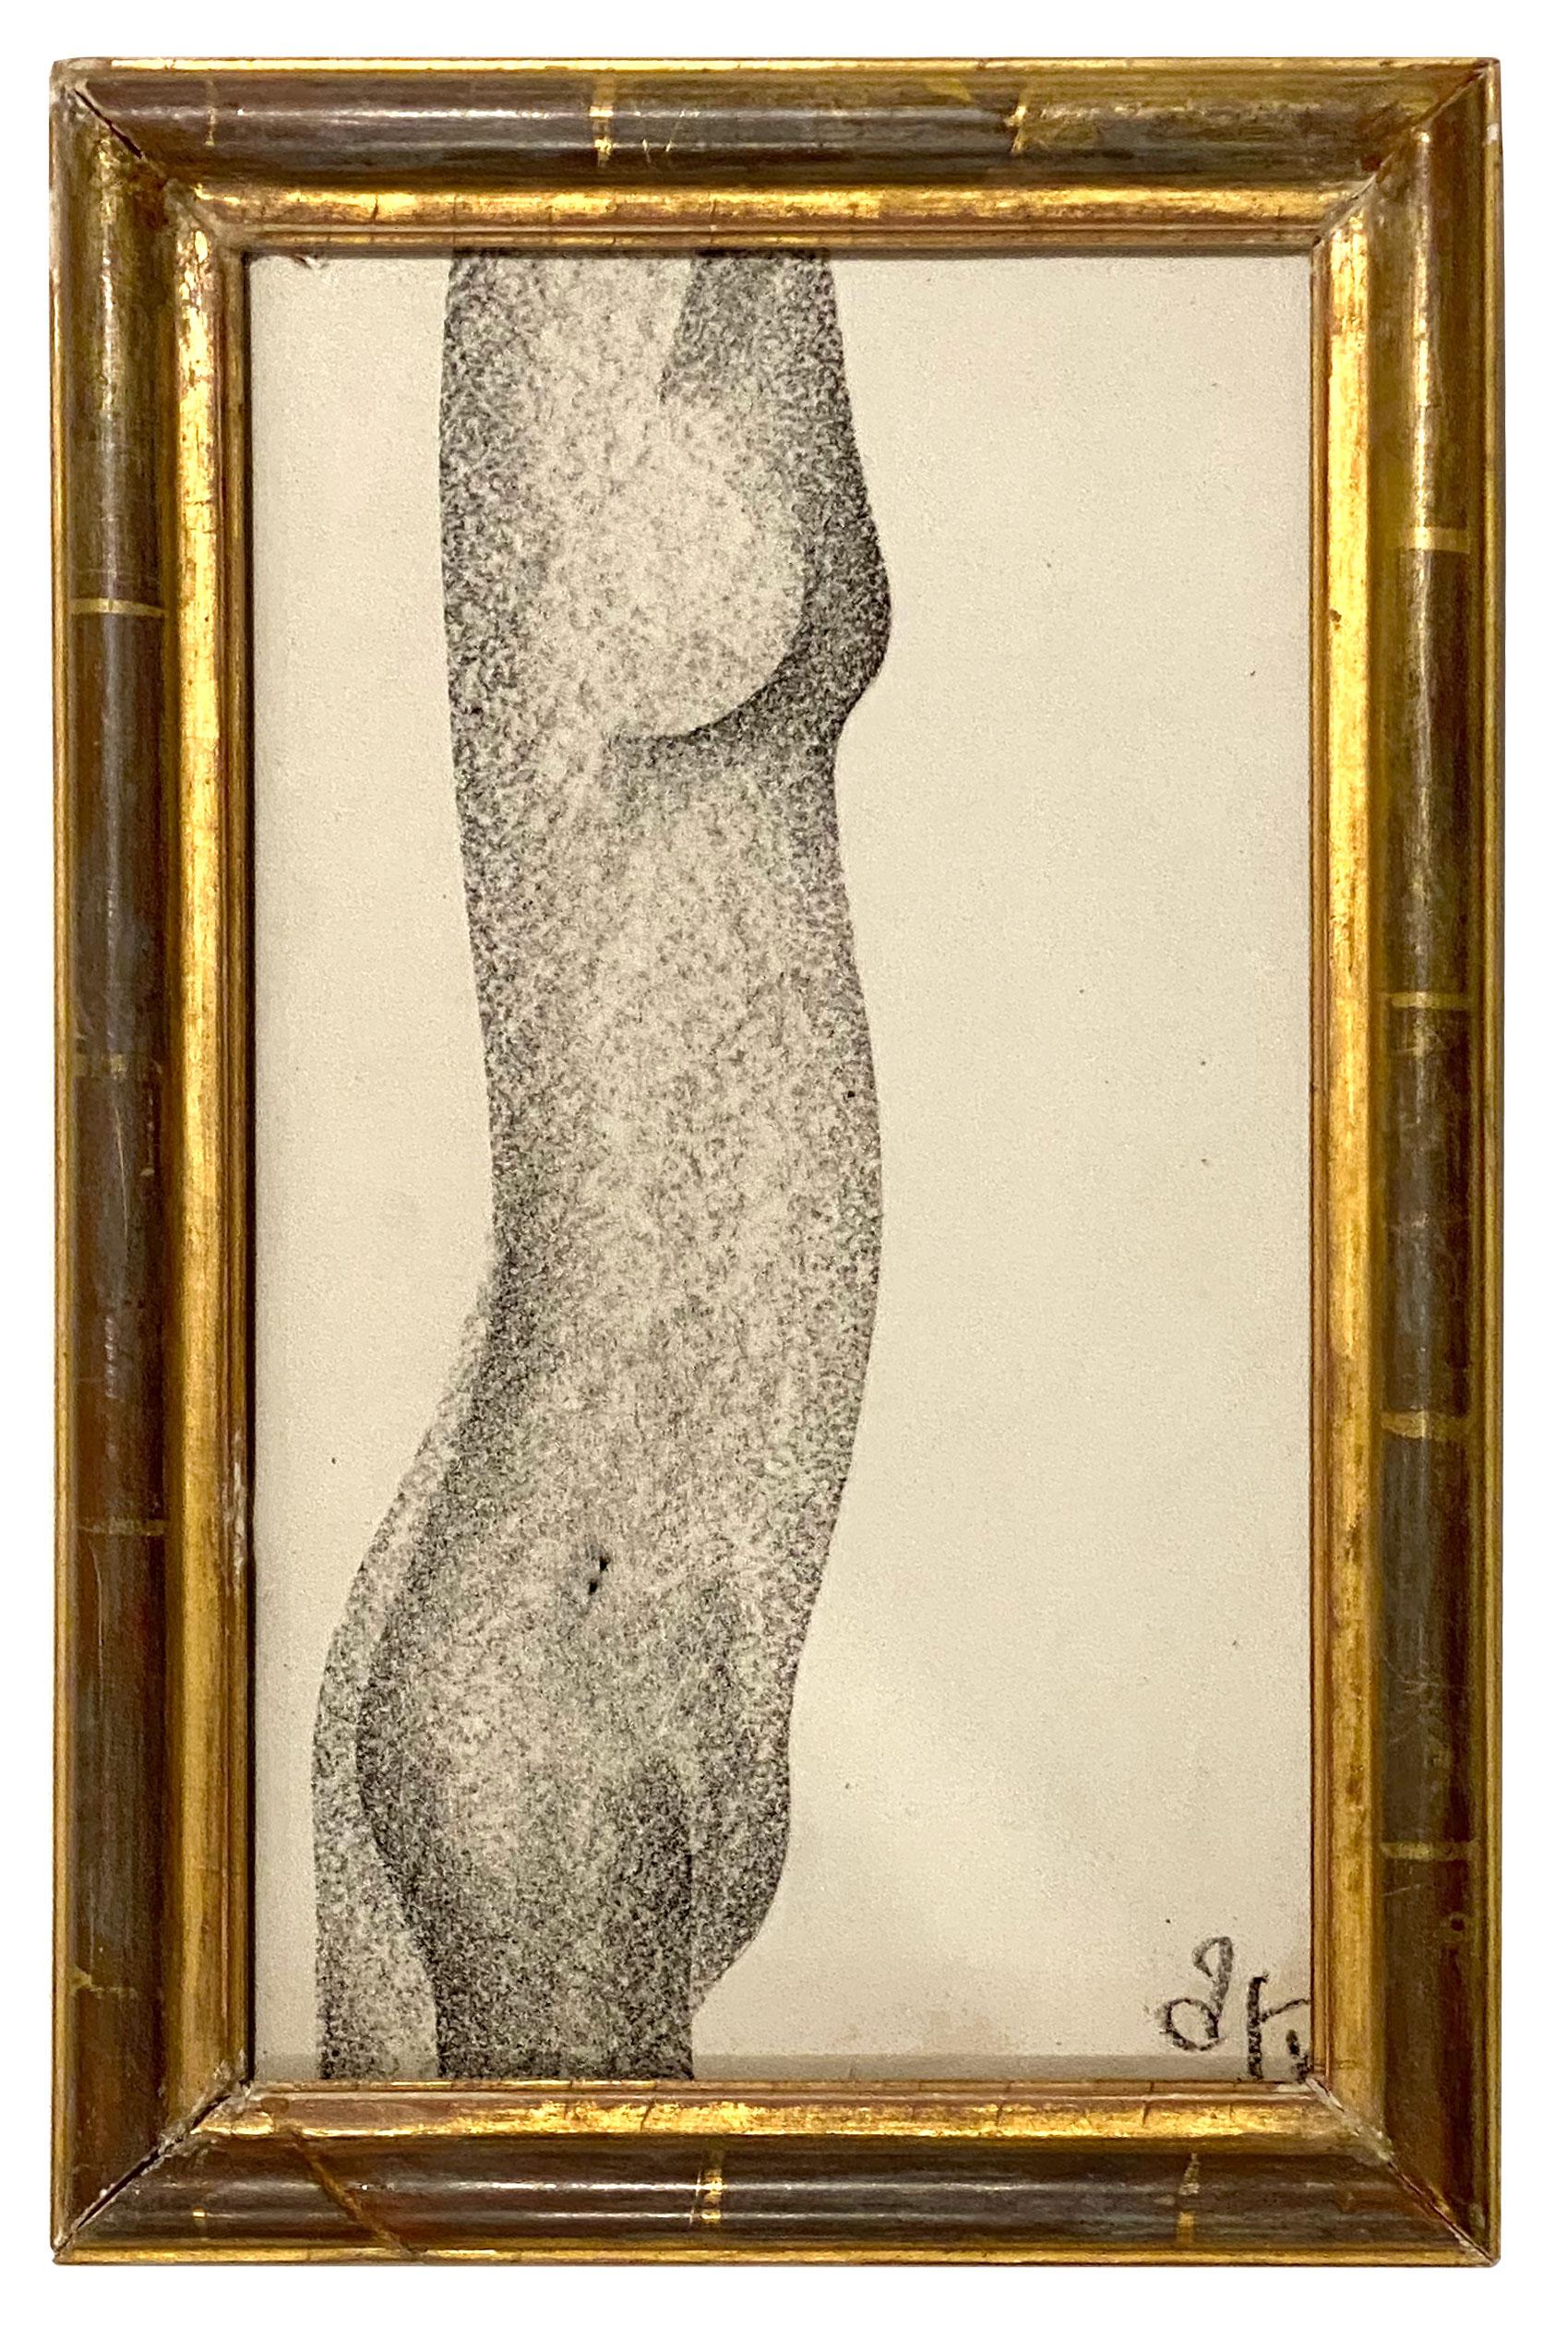 Exceptionally rendered graphite drawing by artist Albert Radoczy. Delicate mark-making of female figure. Signed lower right. Presented in a handsome vintage bamboo-look giltwood frame, behind glass. 

Albert Radoczy (1914-2008) was a renowned artist